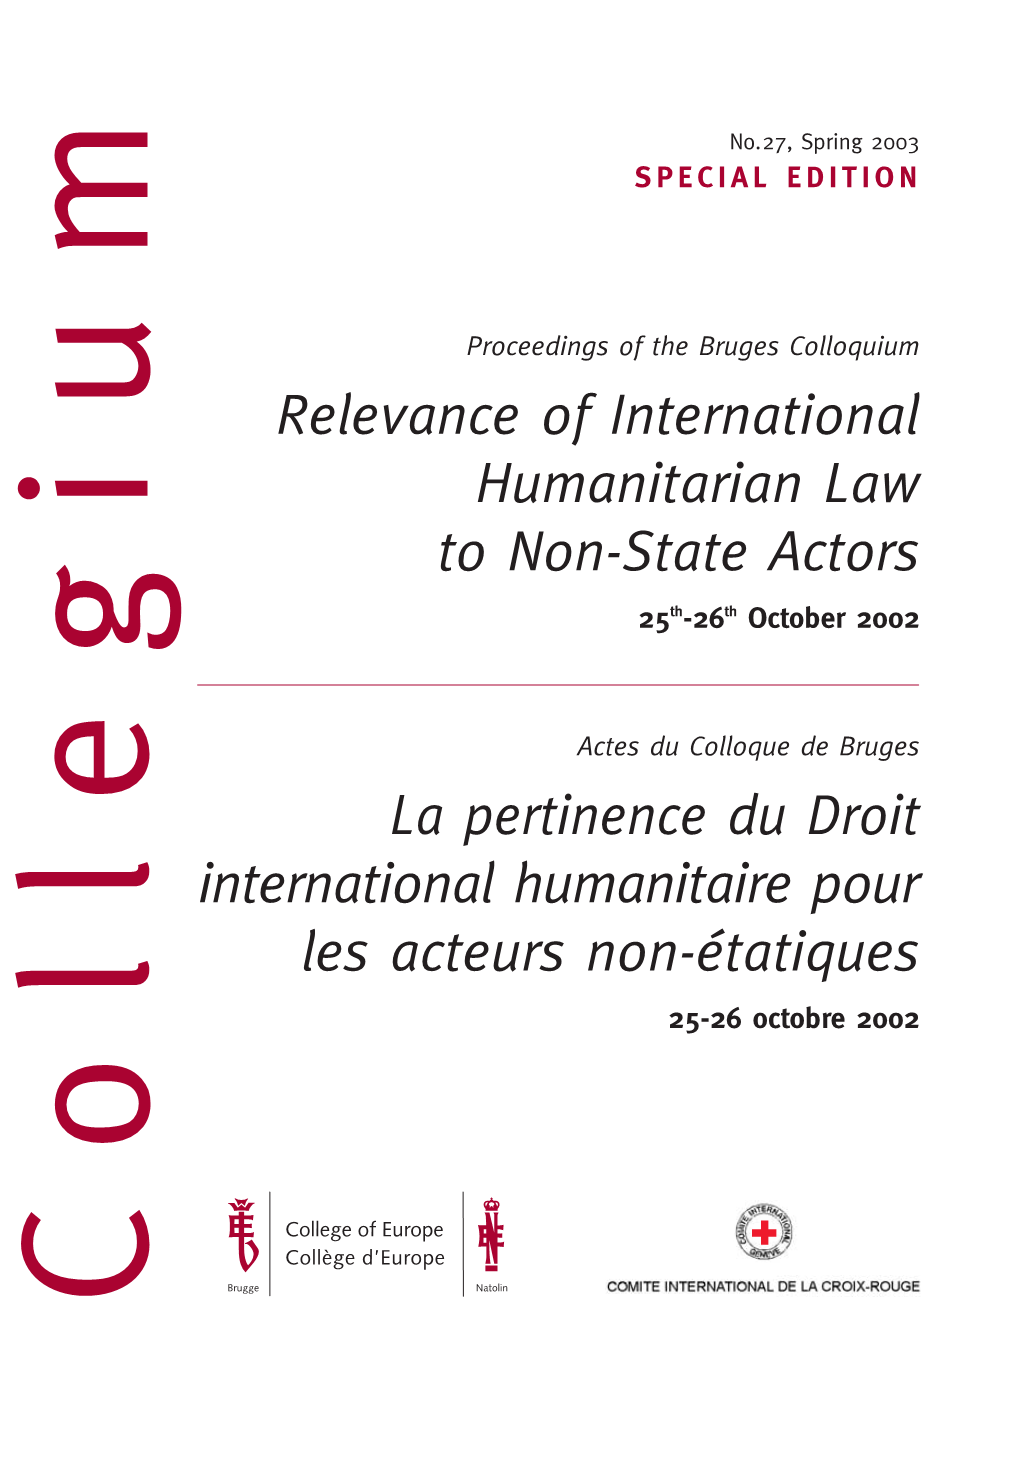 Relevance of International Humanitarian Law to Non-State Actors